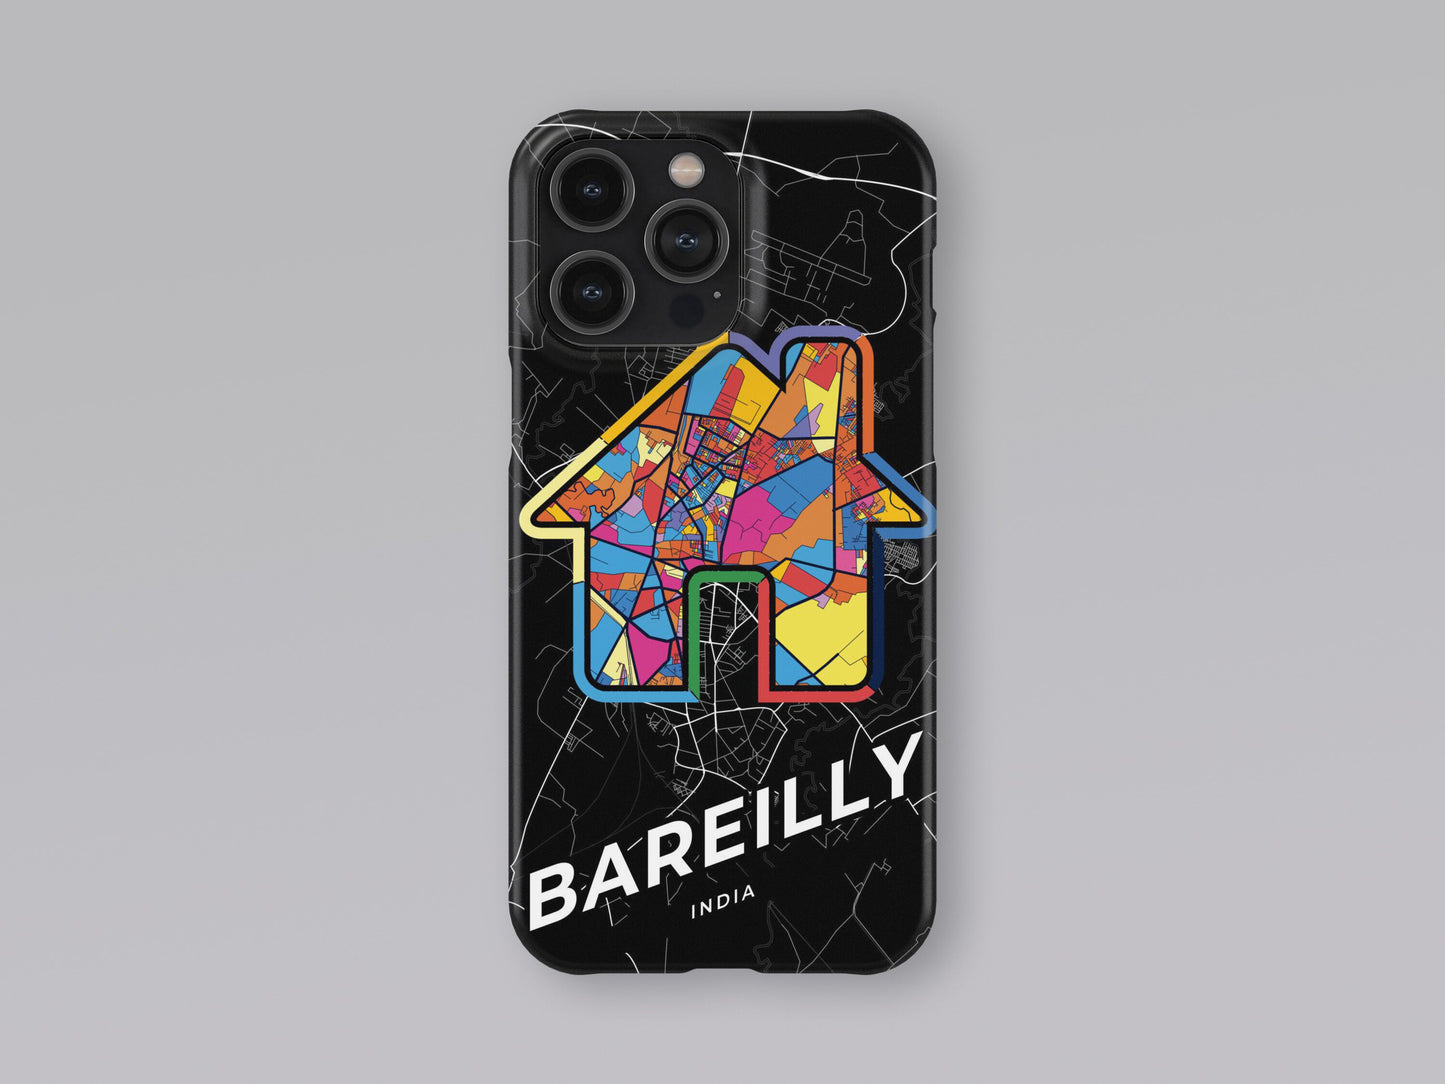 Bareilly India slim phone case with colorful icon. Birthday, wedding or housewarming gift. Couple match cases. 3